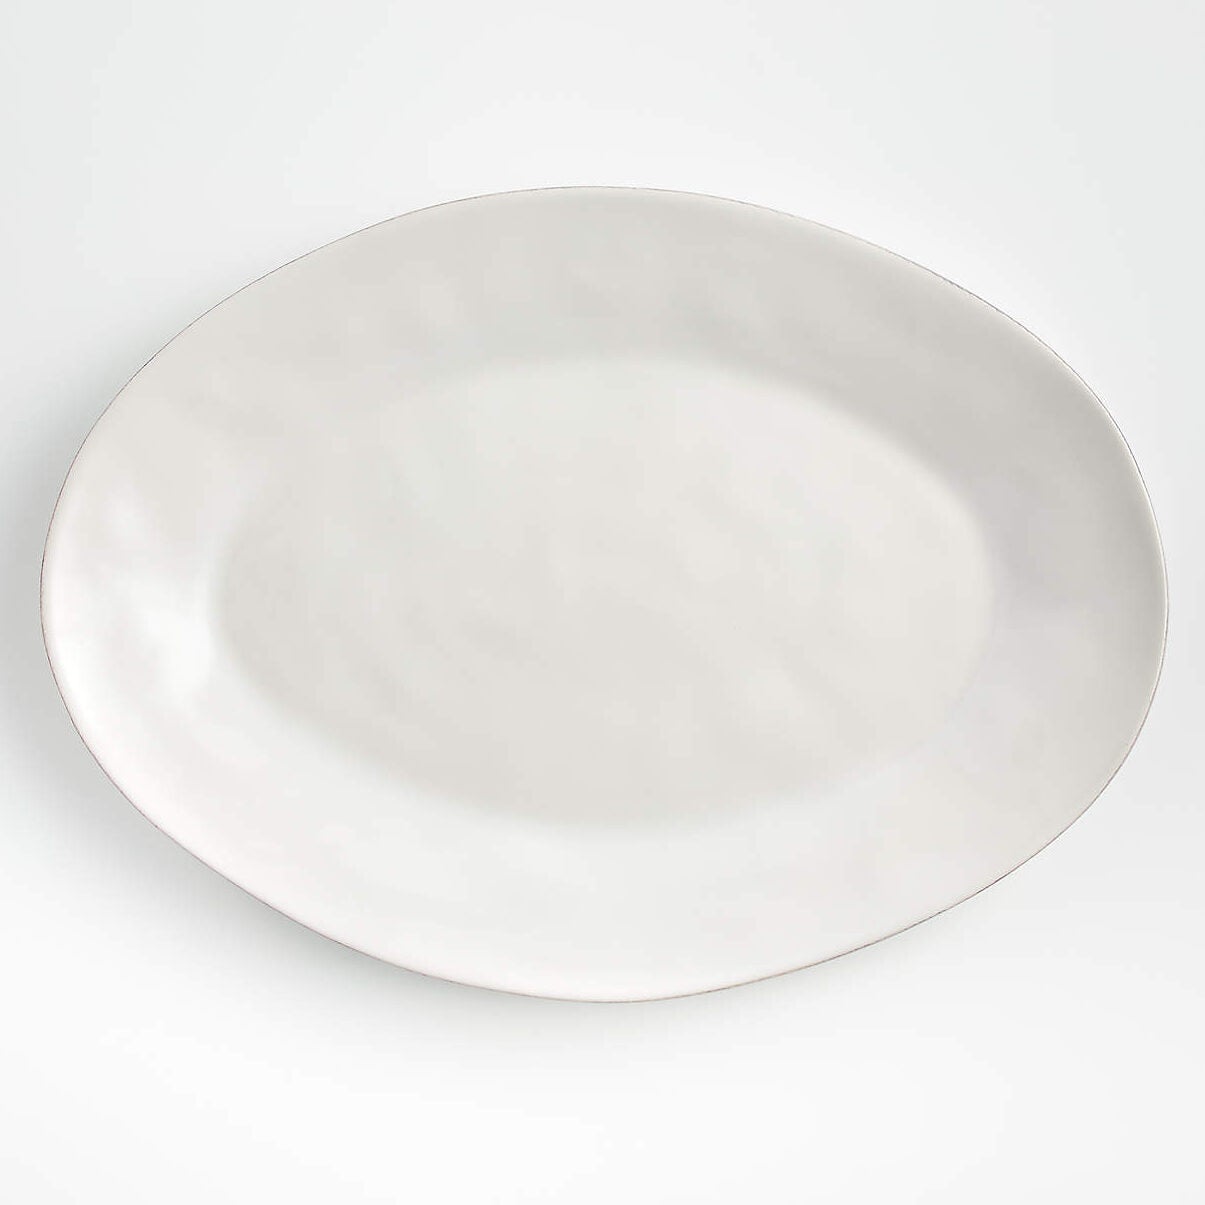 Marin White Large Oval Serving Platter by Crate & Barrel